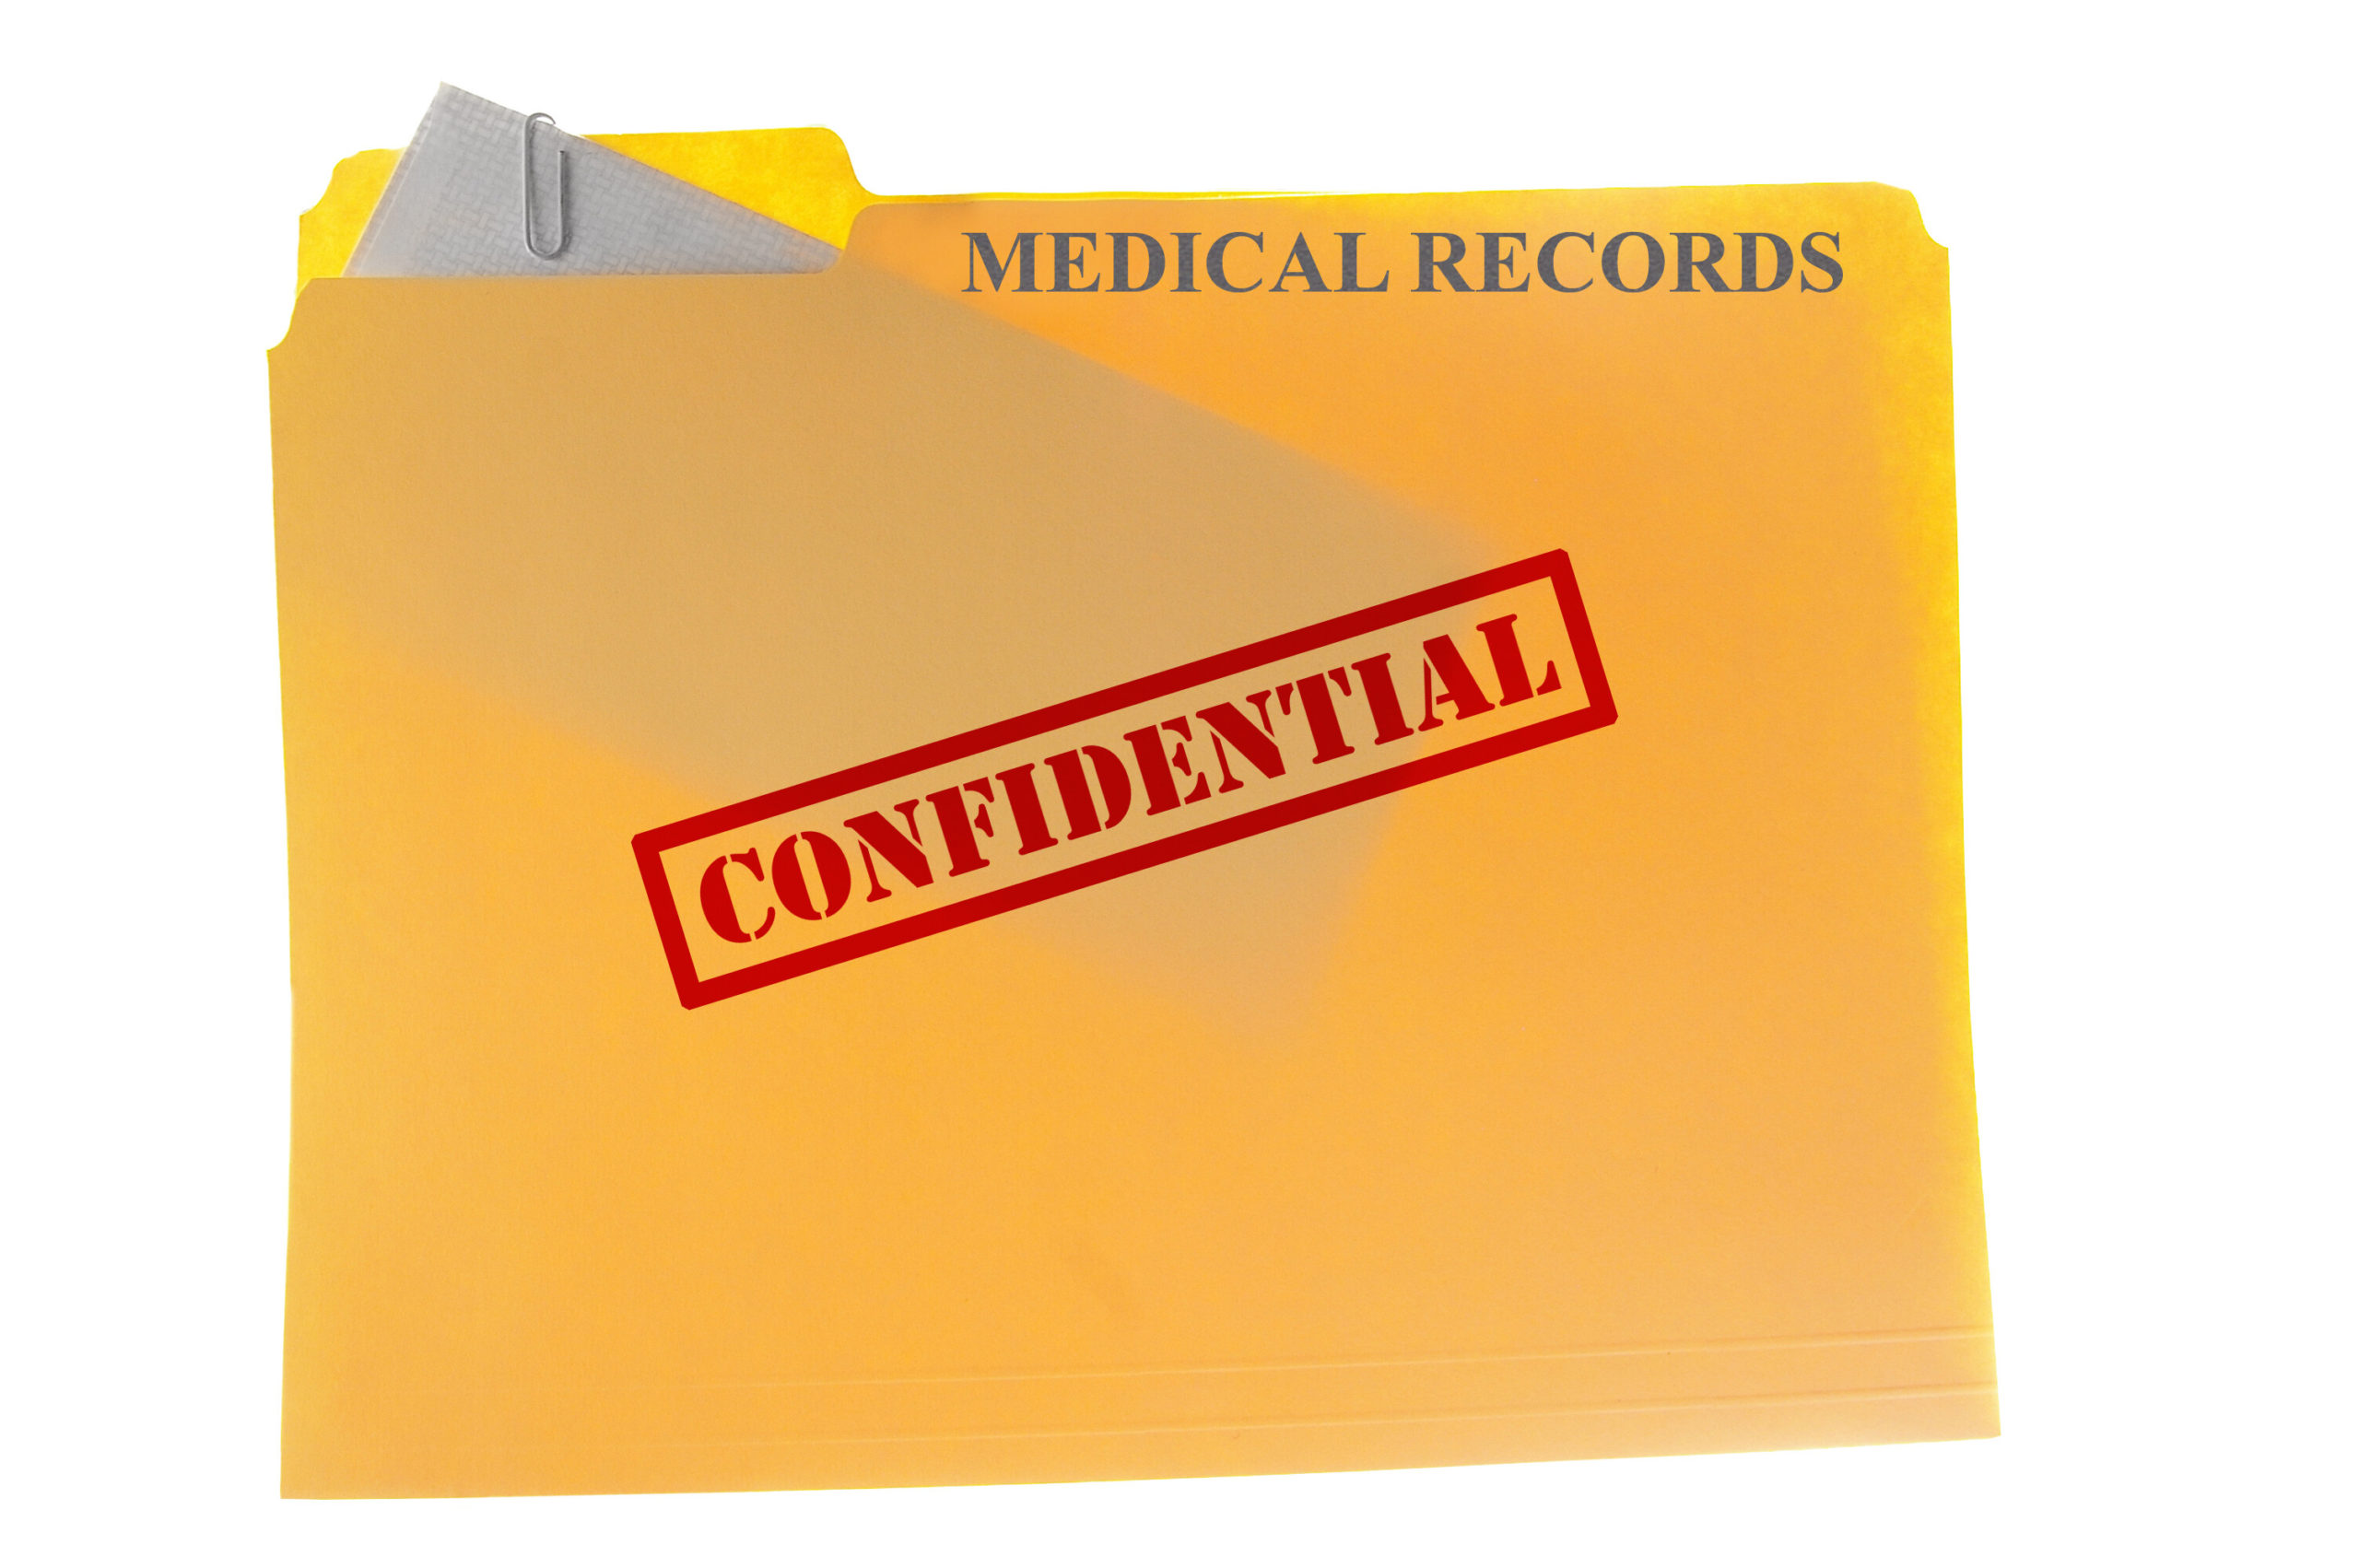 OSFHO confirms patient information may have been accessed by unauthorized third party